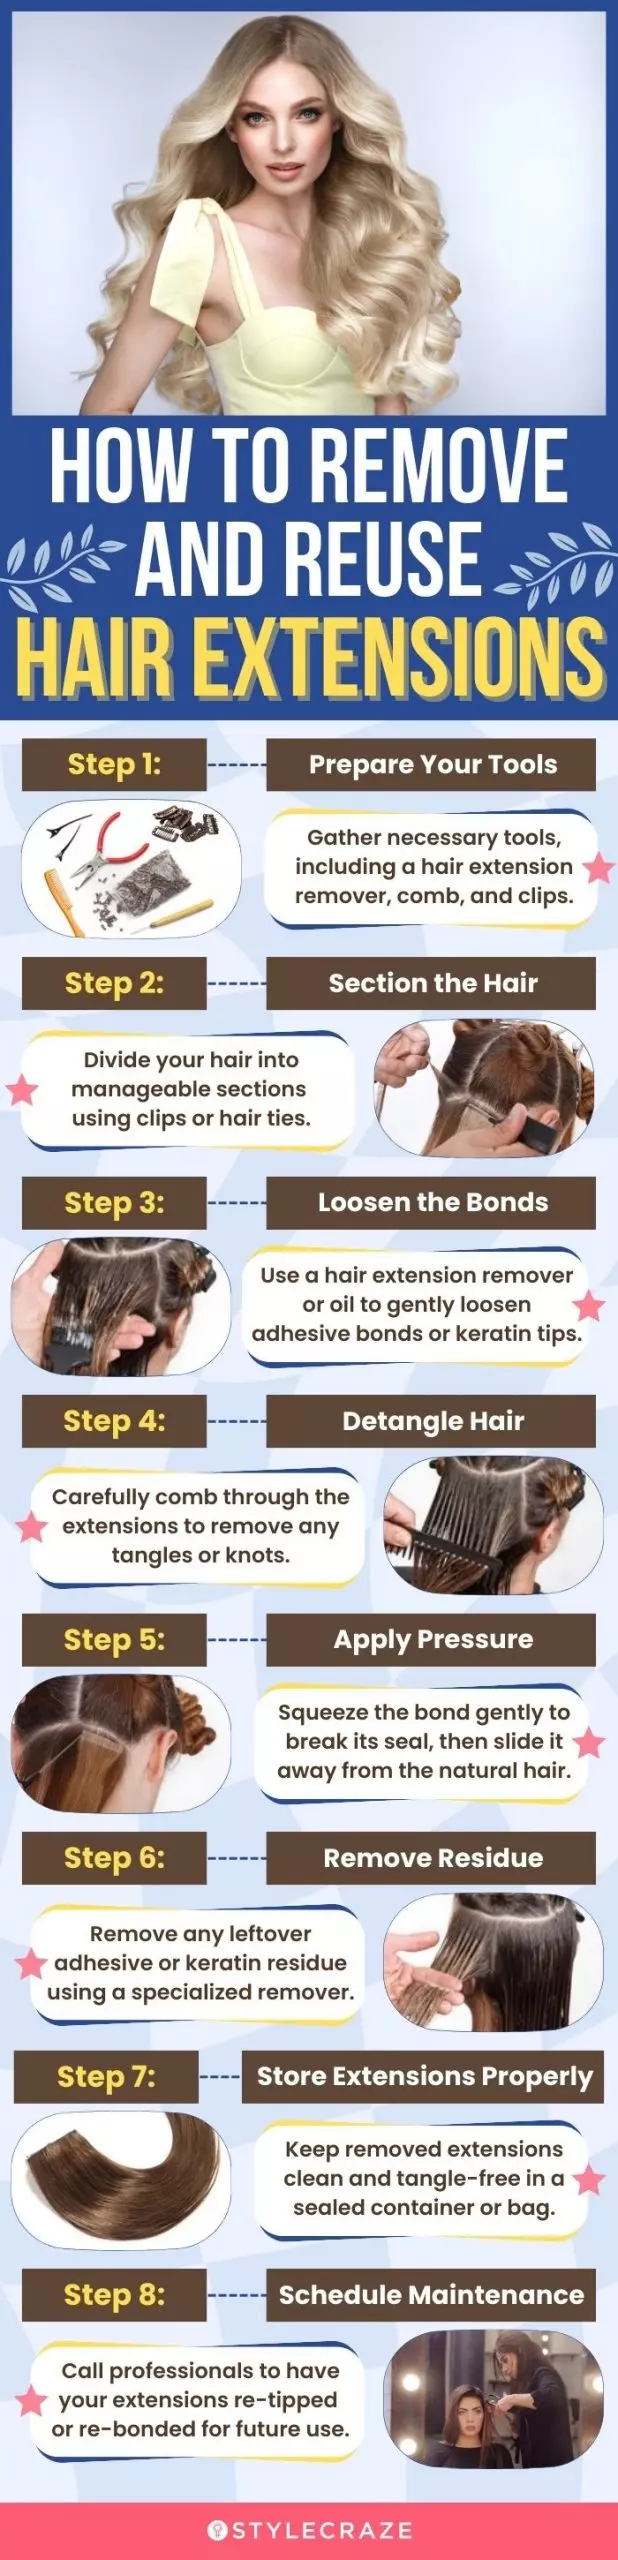 How To Remove And Reuse Hair Extensions (infographic)